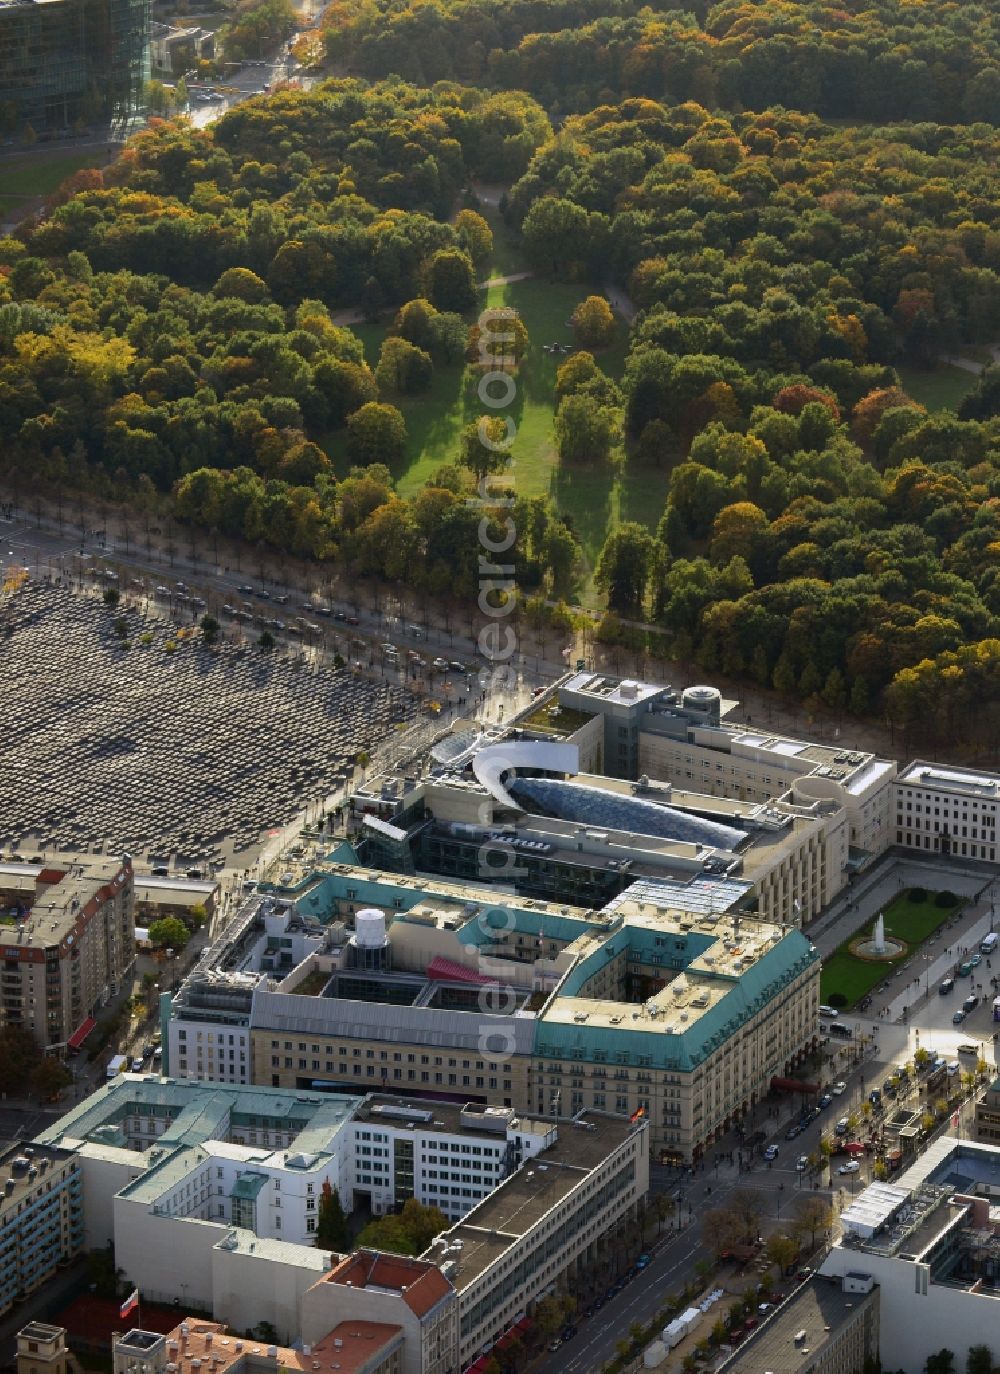 Berlin from the bird's eye view: View over the British Embassy, the Hotel Adlon, the Acadamy of Arts and the Emnassy of the United States of America USA between the Holocaust memorial and the publice square Pariser Platz towards the Tiergarten in Berlin-Mitte